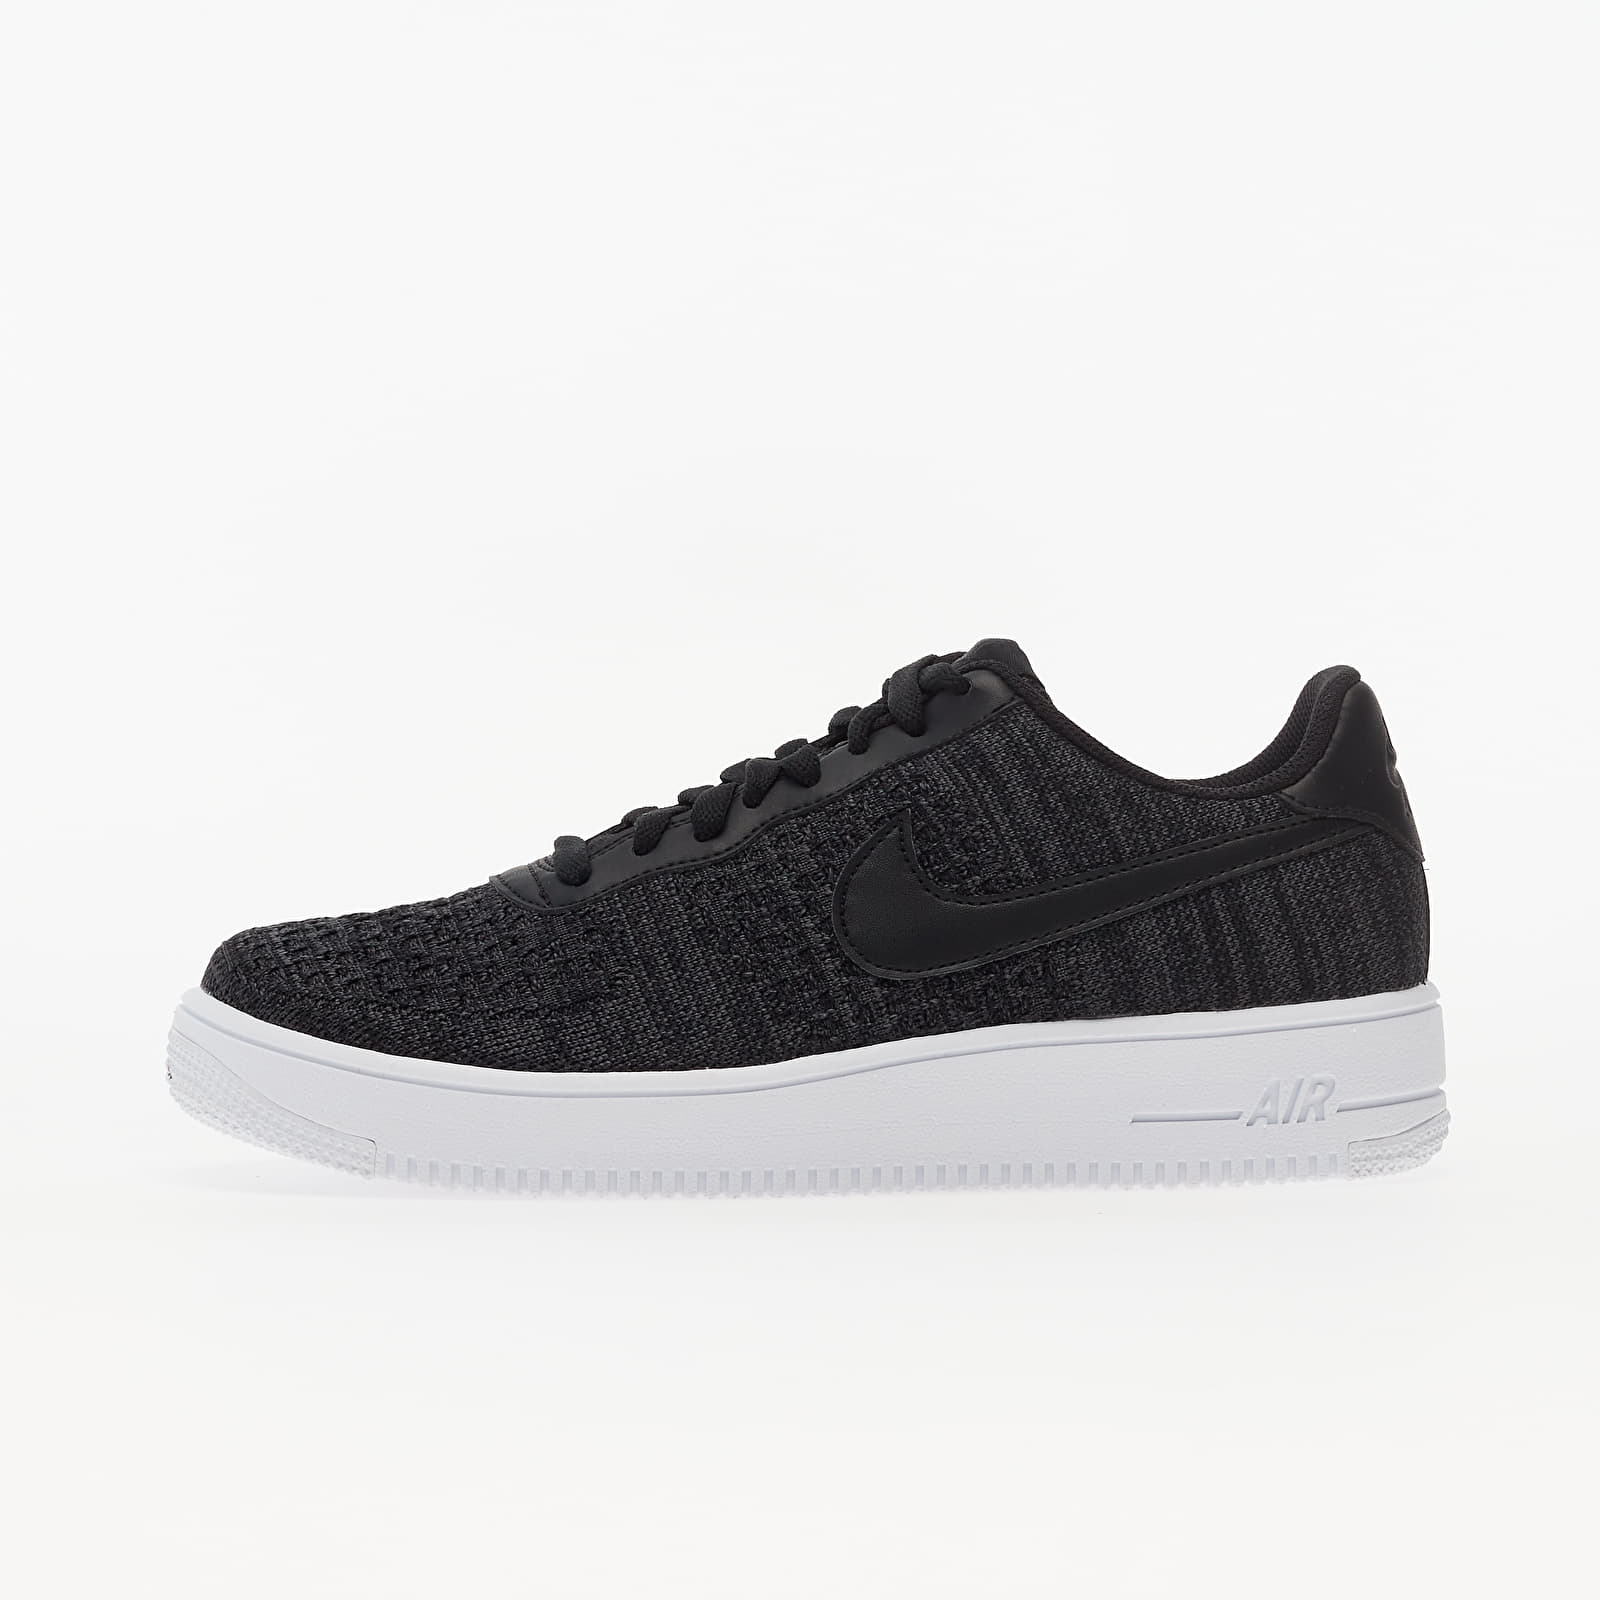 Chaussures et baskets homme Nike Air Force 1 Flyknit 2.0 Black/ Anthracite-White